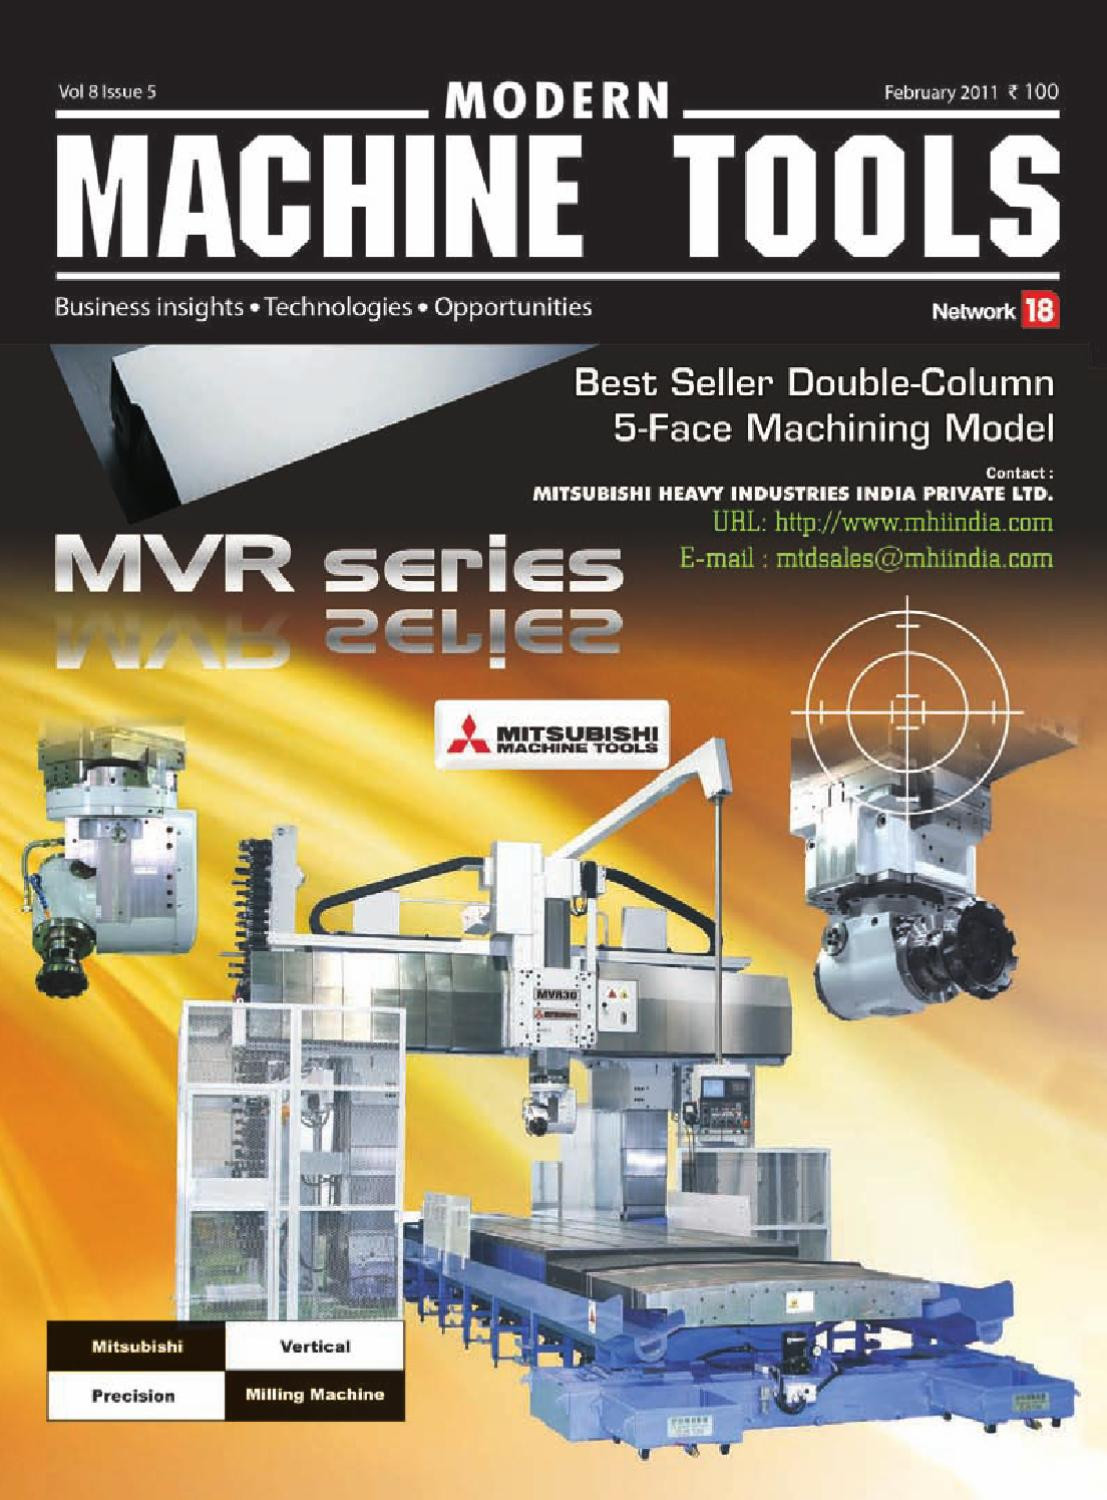 Received Numeros Adcoles Sample for Resume Modern Machine tools – February 2011 by Infomedia18 – issuu